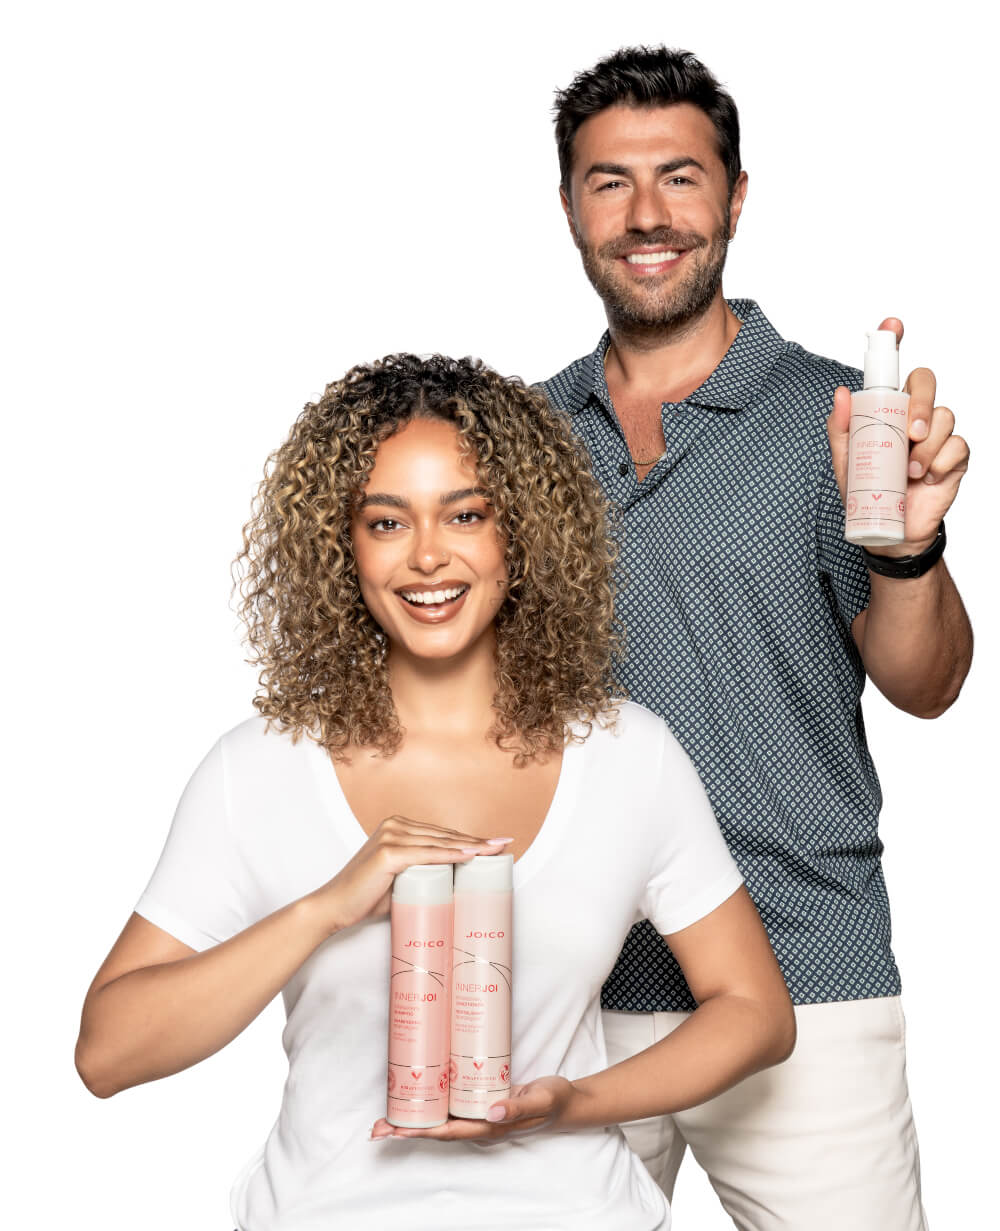 hair model and richard mannah showing strengthen hair products